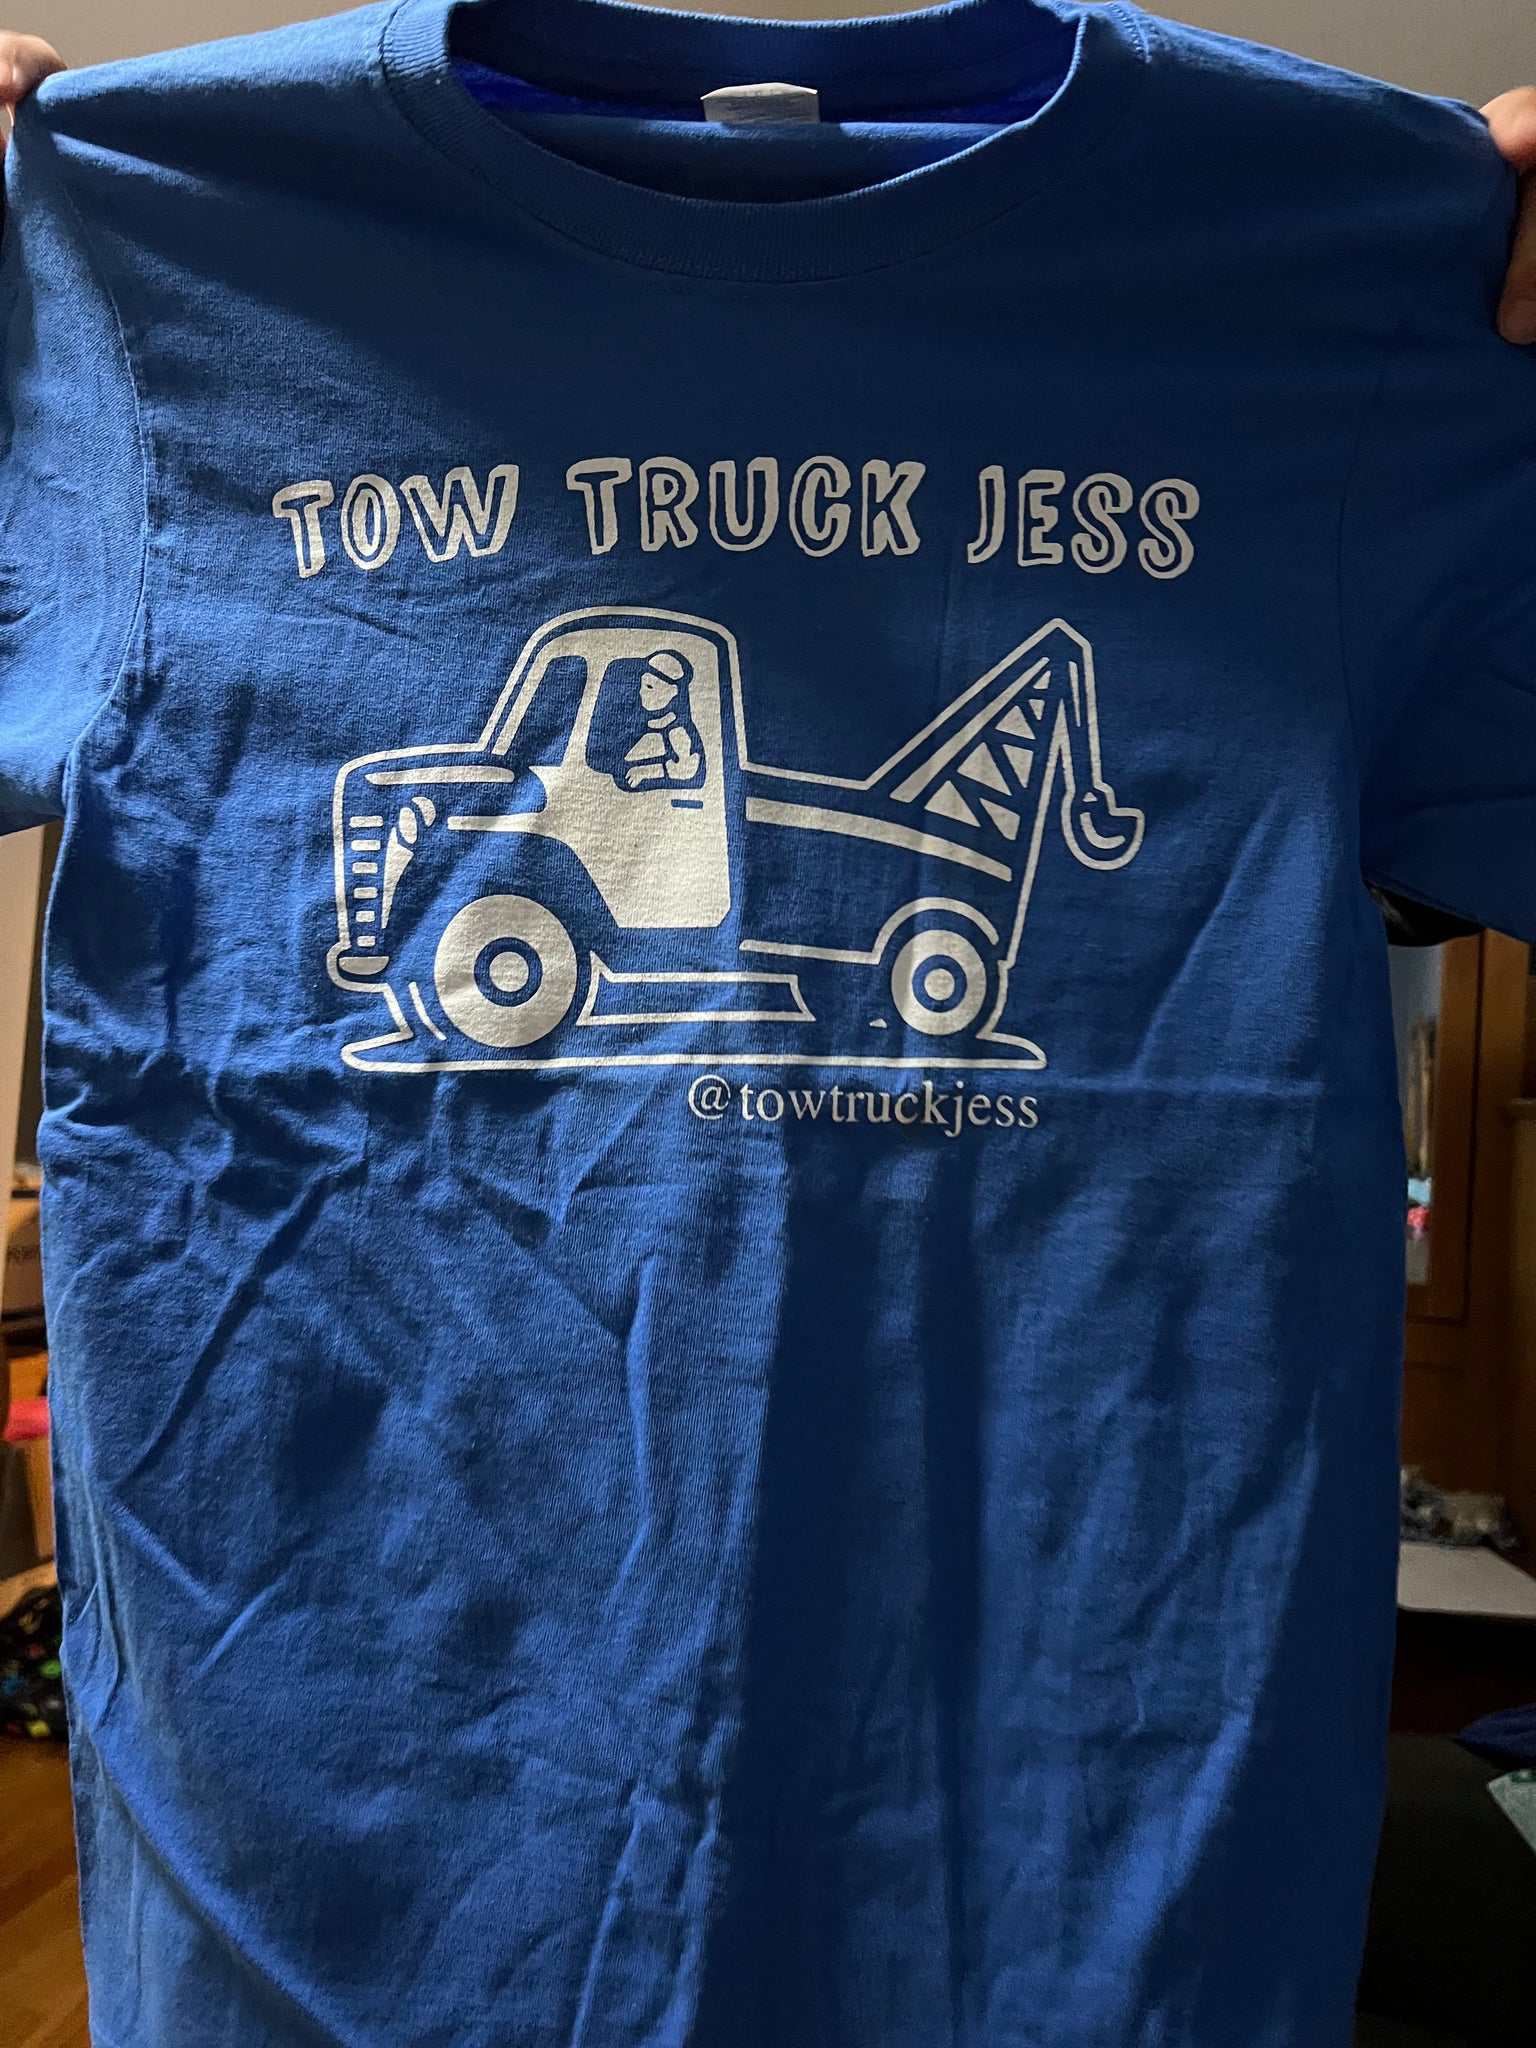 A Free Bracelet with Kids Youth Blue with White Logo Tow Truck Jess T-Shirt w/Wrecker with Black Logo